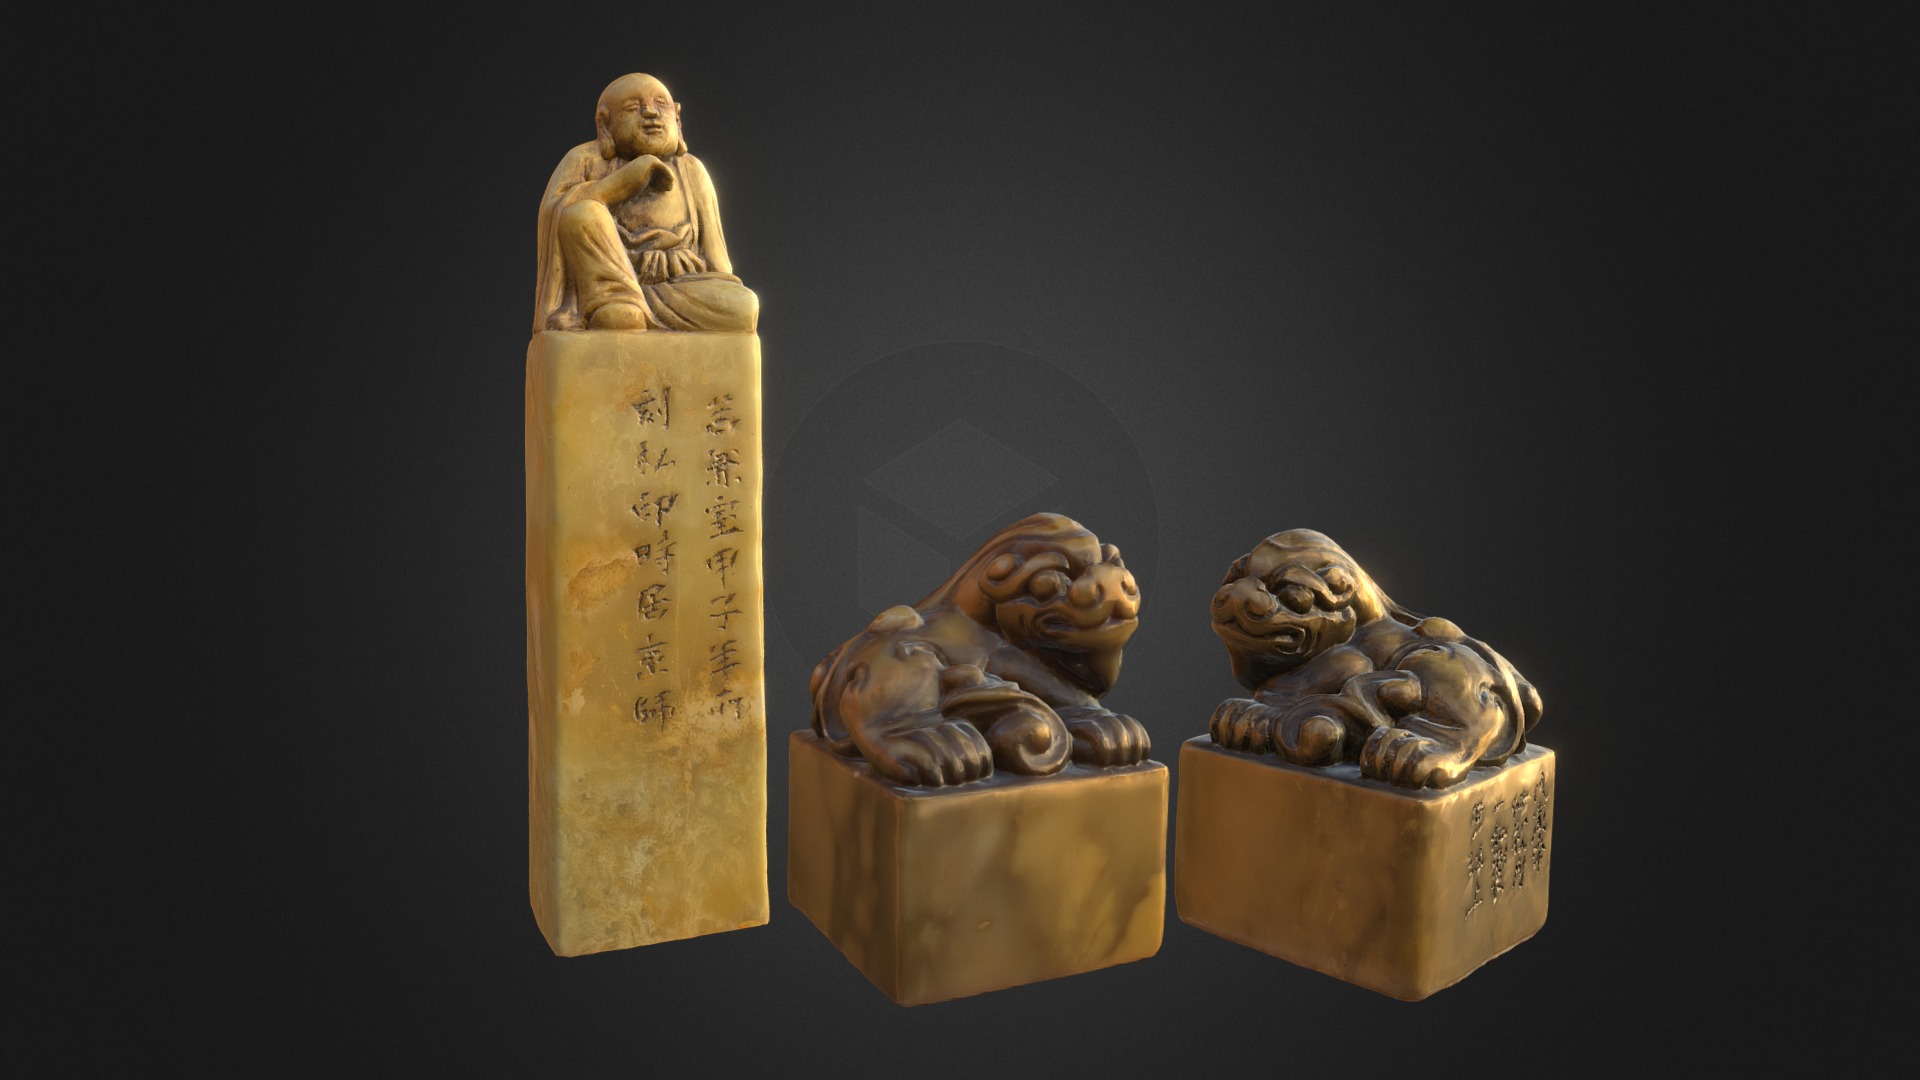 3D model Zhao Zhiqian seal engraving 清代著名篆刻家趙之謙所治印章 - This is a 3D model of the Zhao Zhiqian seal engraving 清代著名篆刻家趙之謙所治印章. The 3D model is about a group of gold and silver coins.